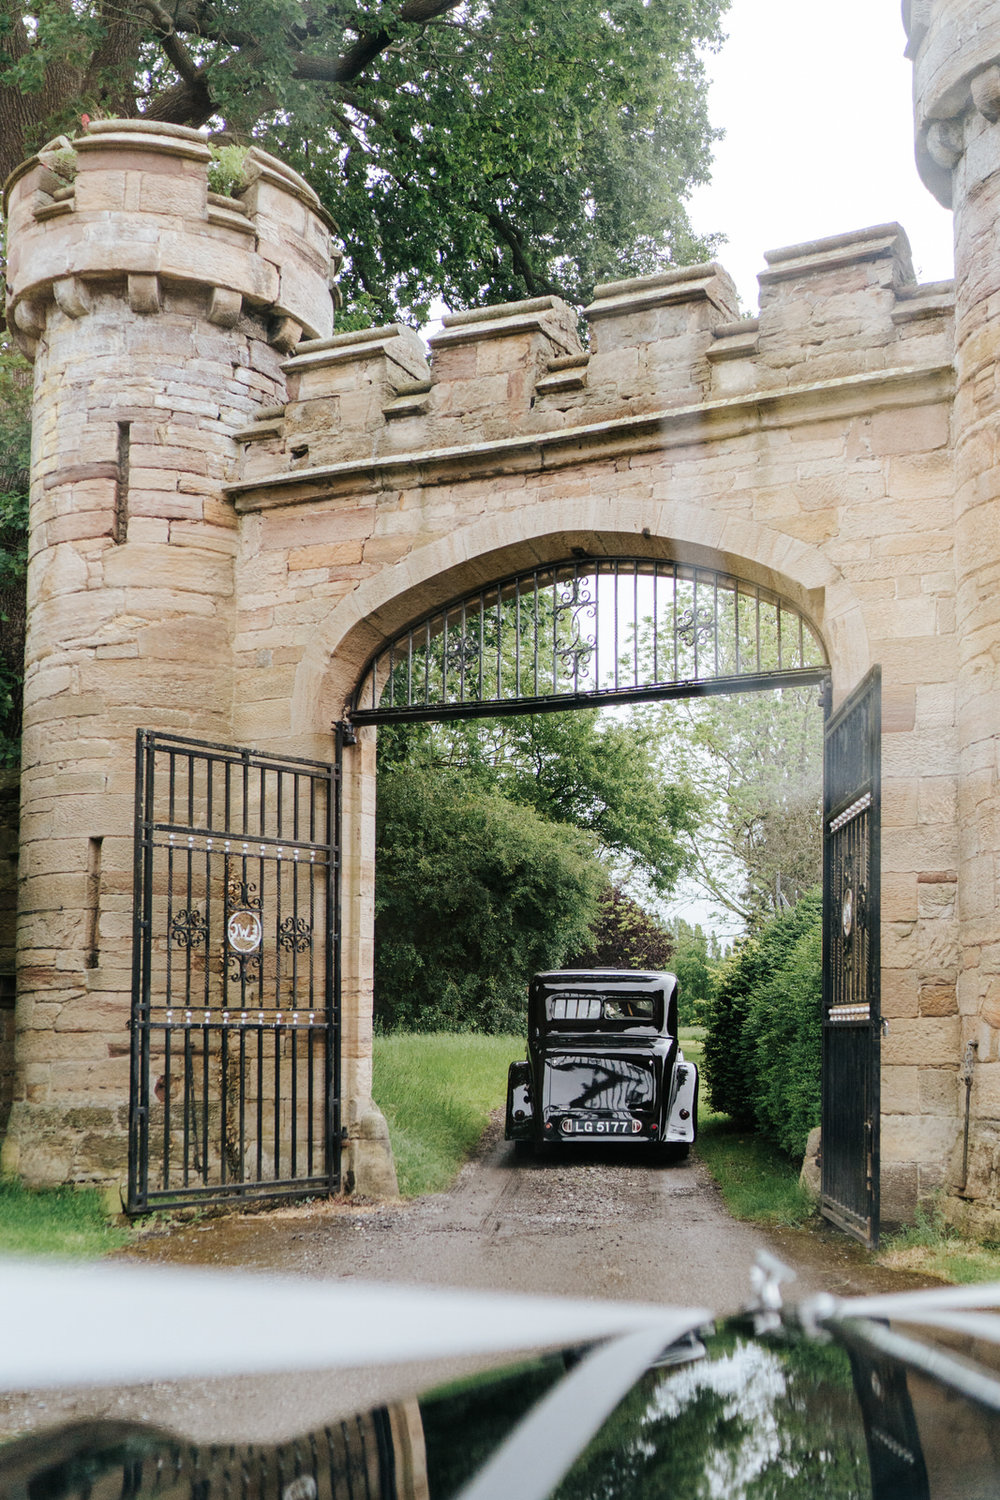  Bride's car passes under fortified gates at Hawarden Castle in Wales, UK 